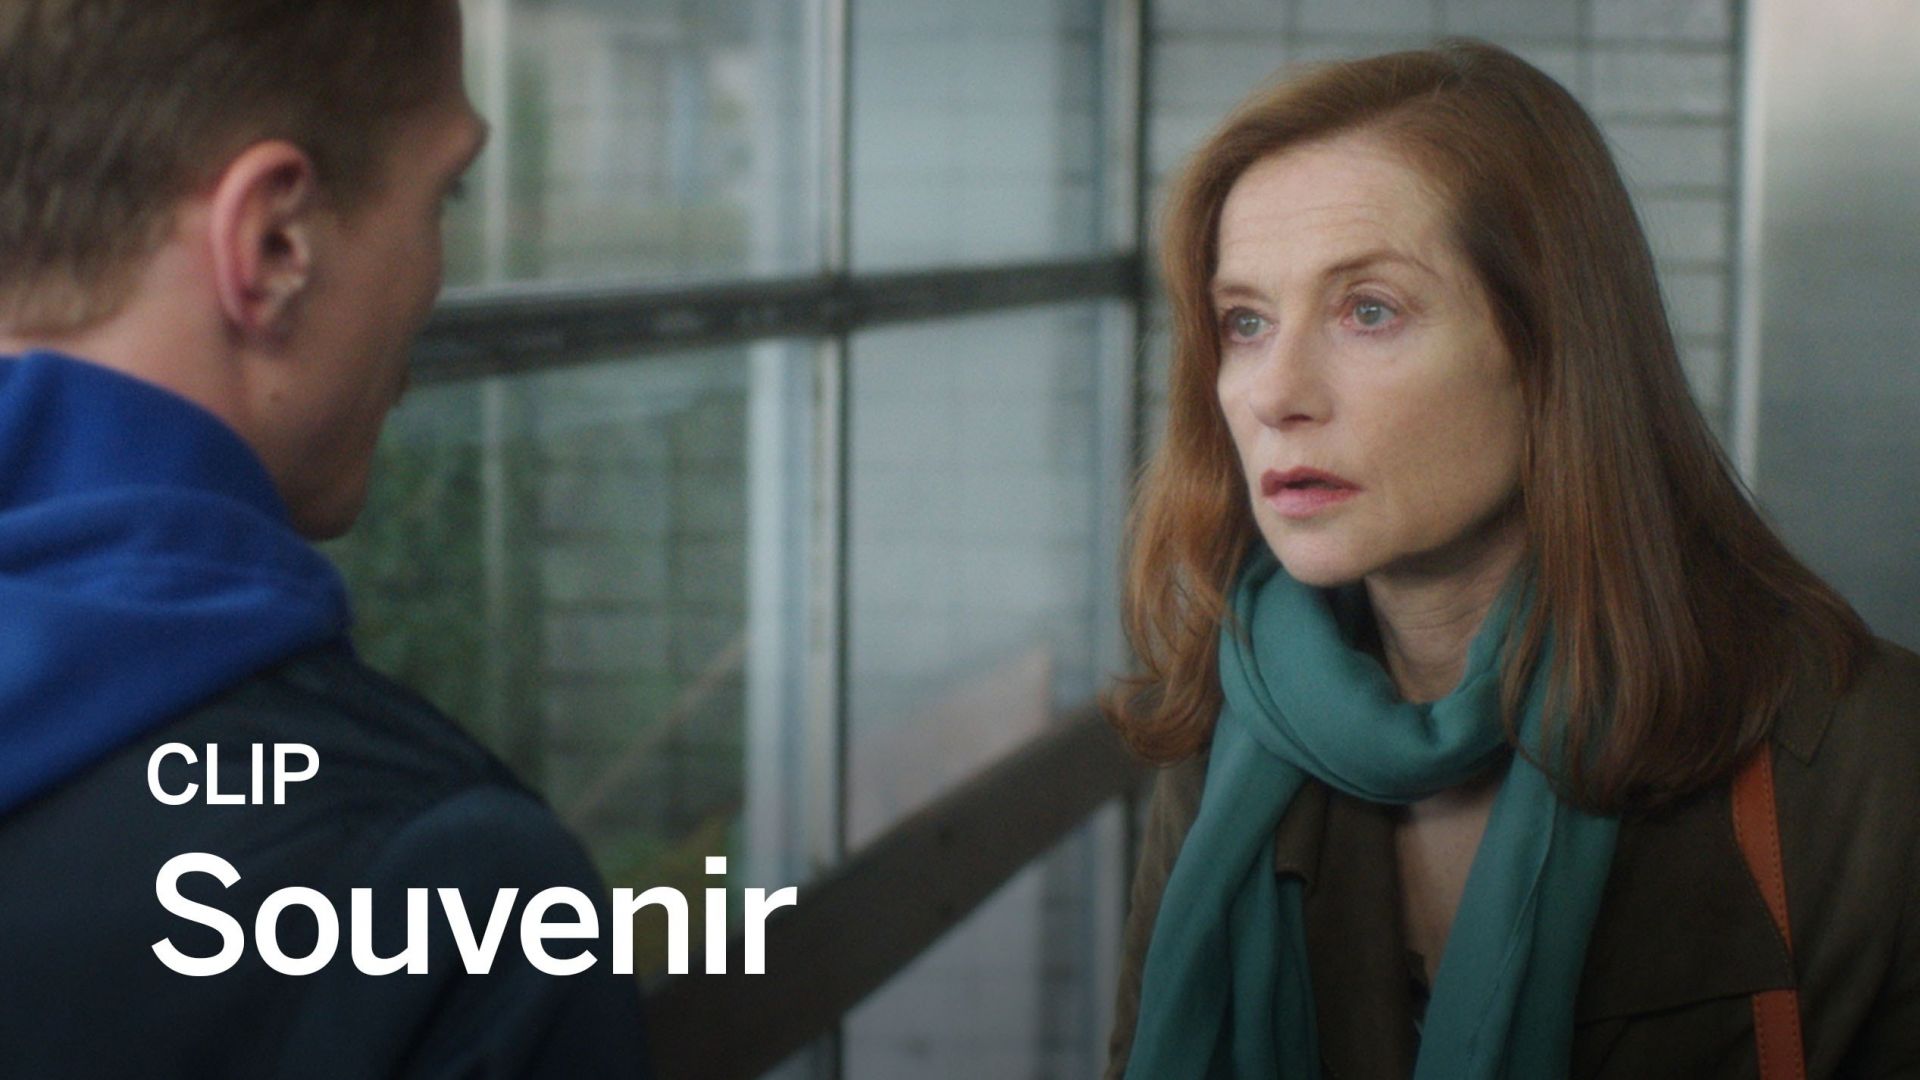 Clip from 'Souvenir' with Isabelle Huppert